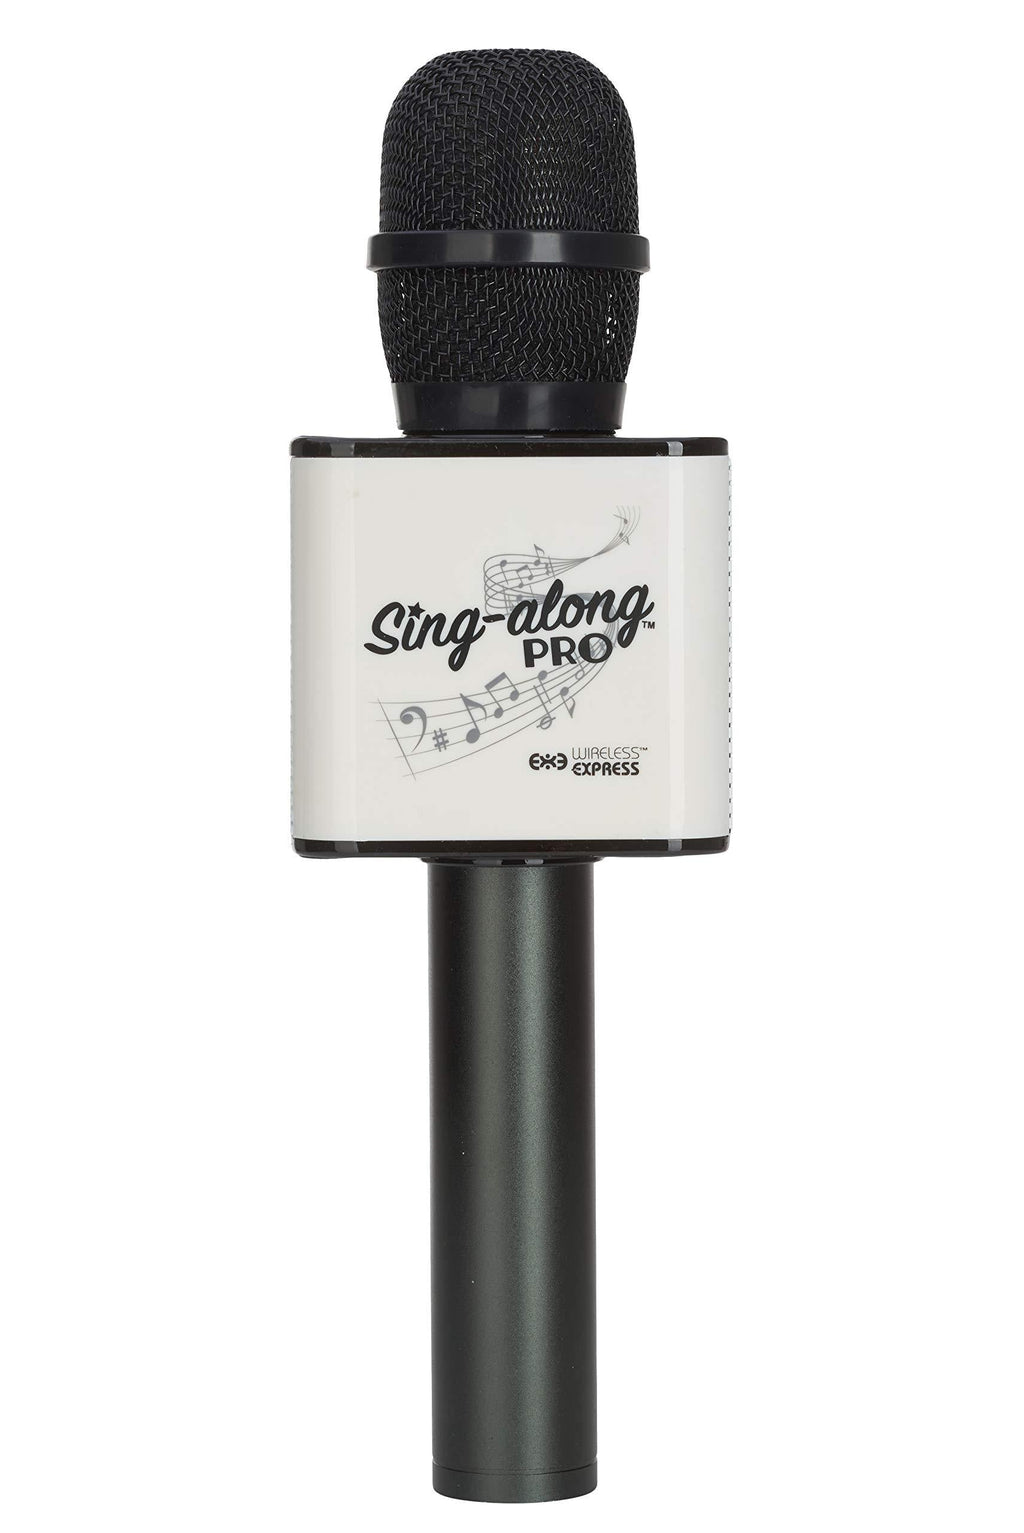 Sing-along PRO Bluetooth Microphone - Wireless Karaoke Microphone with Bluetooth for Kids and Adults - Portable Microphone for Home Karaoke - Sing-Along Mic with Stereo Audio - Black